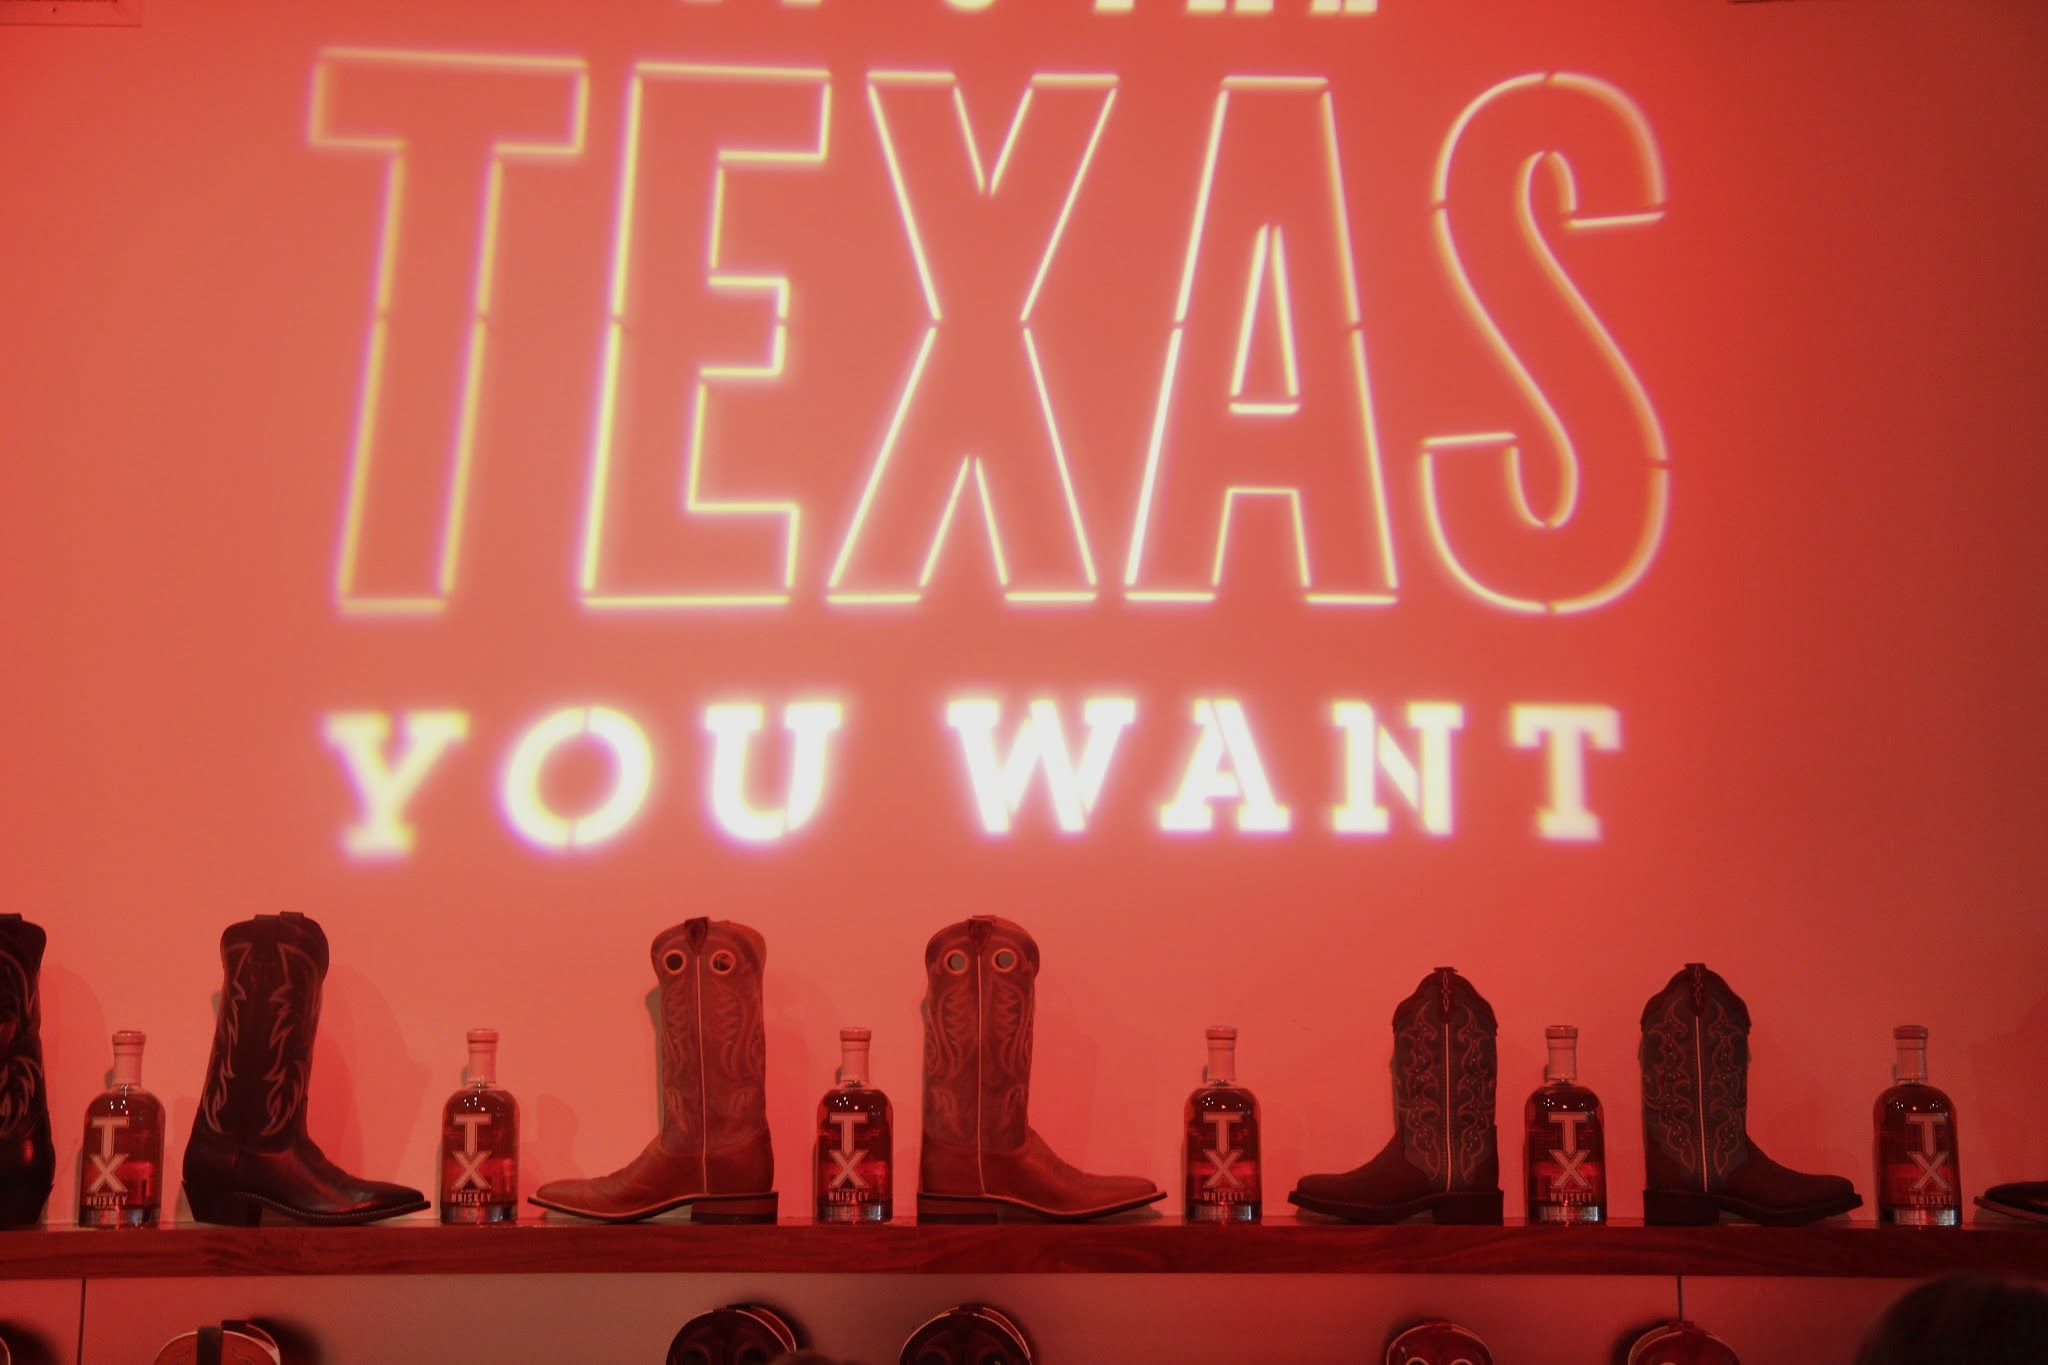 Texas You Want wall projection